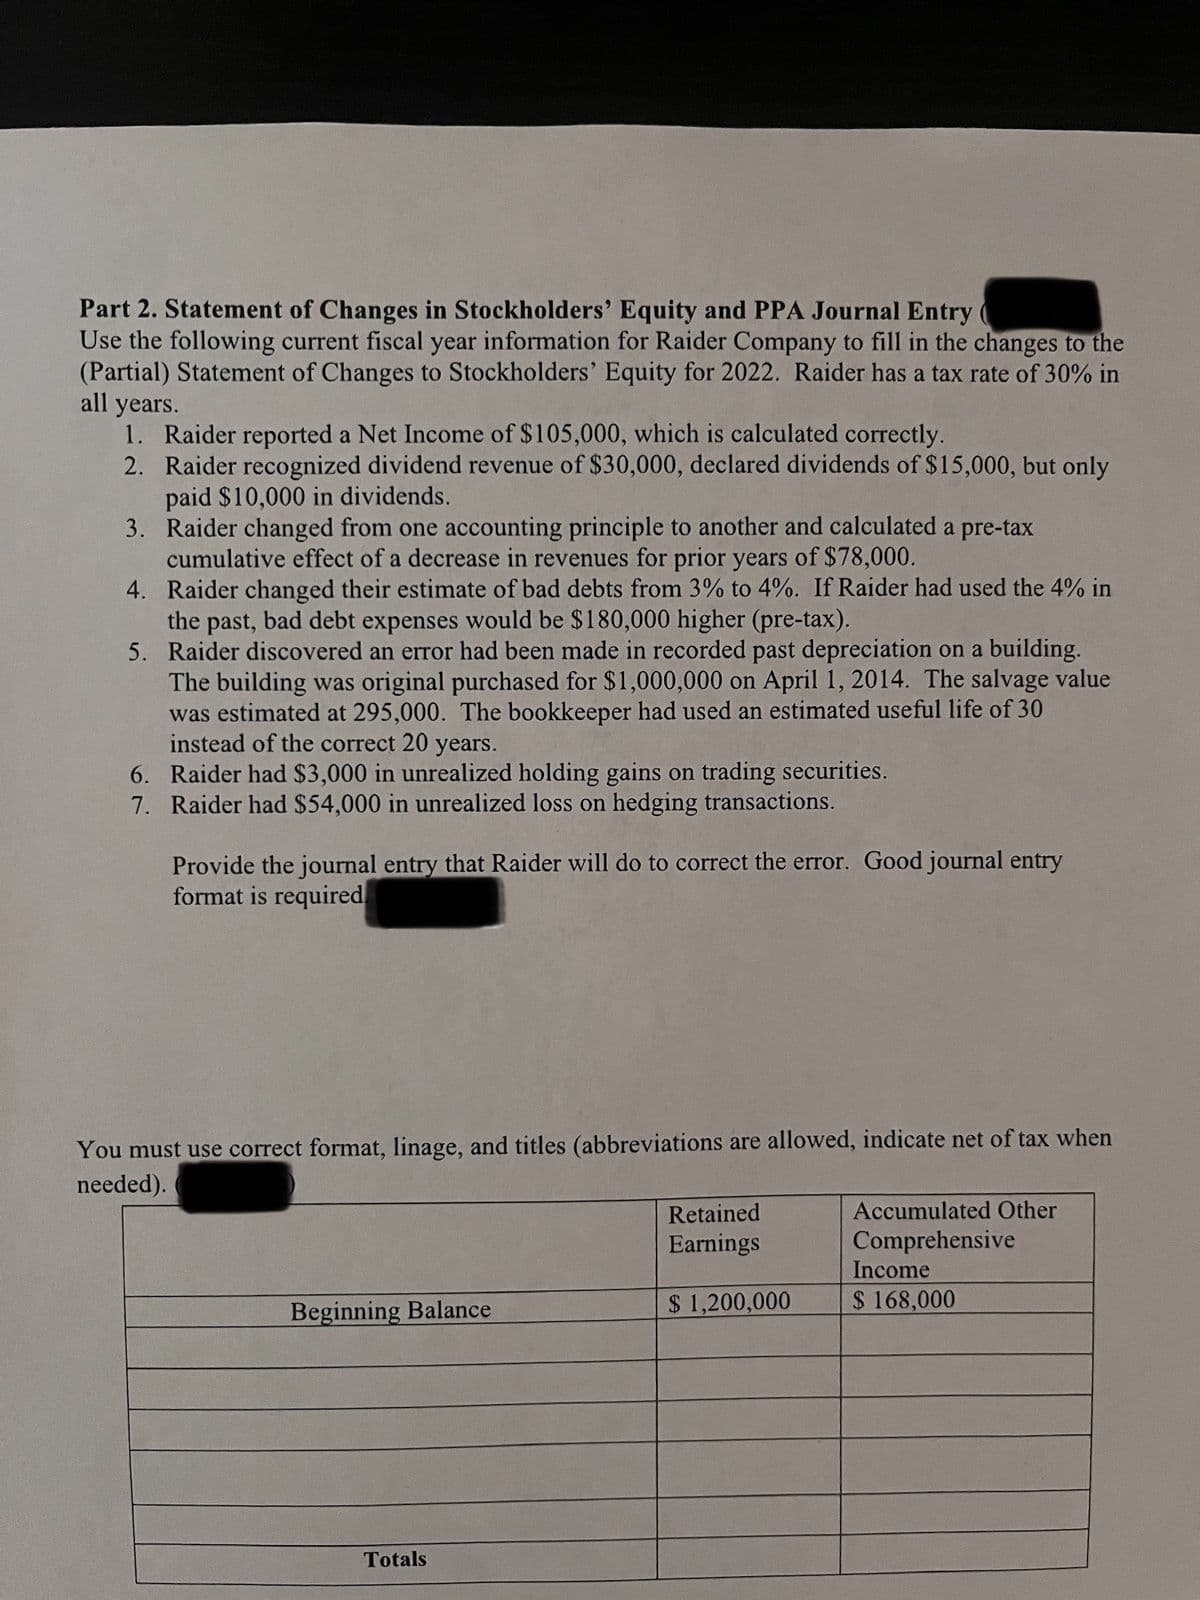 Part 2. Statement of Changes in Stockholders' Equity and PPA Journal Entry(
Use the following current fiscal year information for Raider Company to fill in the changes to the
(Partial) Statement of Changes to Stockholders' Equity for 2022. Raider has a tax rate of 30% in
all years.
1. Raider reported a Net Income of $105,000, which is calculated correctly.
2. Raider recognized dividend revenue of $30,000, declared dividends of $15,000, but only
paid $10,000 in dividends.
3.
Raider changed from one accounting principle to another and calculated a pre-tax
cumulative effect of a decrease in revenues for prior years of $78,000.
4. Raider changed their estimate of bad debts from 3% to 4%. If Raider had used the 4% in
the past, bad debt expenses would be $180,000 higher (pre-tax).
5. Raider discovered an error had been made in recorded past depreciation on a building.
The building was original purchased for $1,000,000 on April 1, 2014. The salvage value
was estimated at 295,000. The bookkeeper had used an estimated useful life of 30
instead of the correct 20 years.
6. Raider had $3,000 in unrealized holding gains on trading securities.
7.
Raider had $54,000 in unrealized loss on hedging transactions.
Provide the journal entry that Raider will do to correct the error. Good journal entry
format is required
You must use correct format, linage, and titles (abbreviations are allowed, indicate net of tax when
needed).
Beginning Balance
Totals
Retained
Earnings
$ 1,200,000
Accumulated Other
Comprehensive
Income
$ 168,000